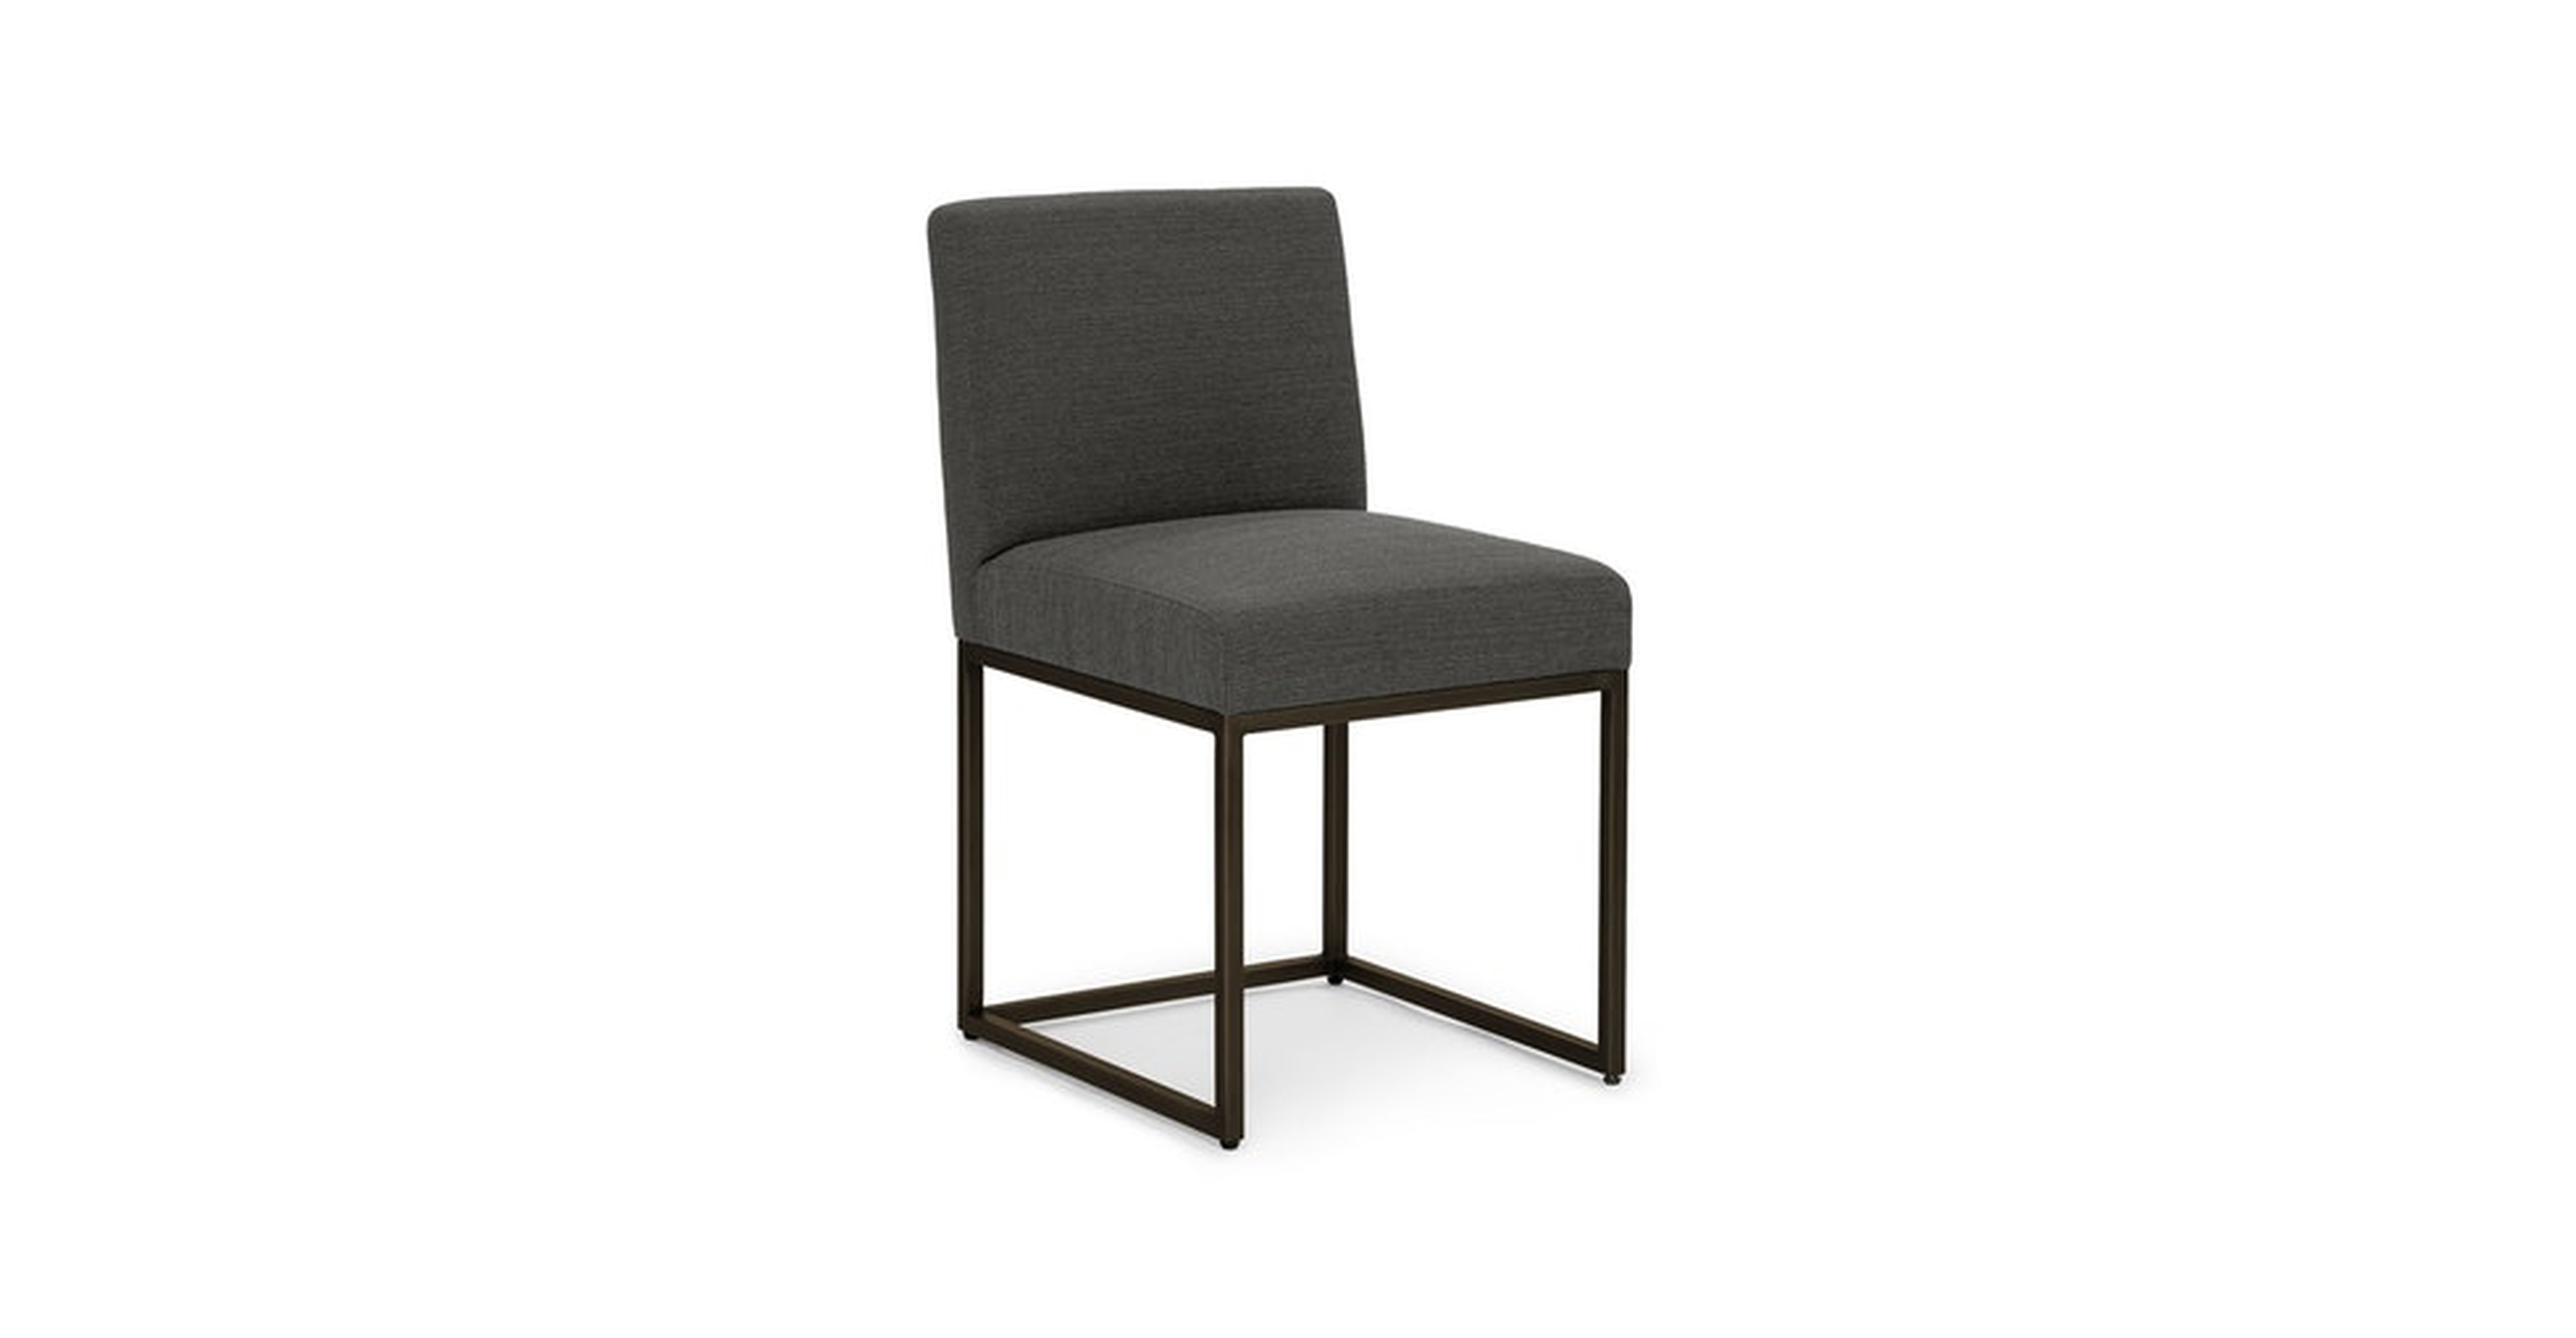 Oscuro Cinder Gray Dining Chair - Article